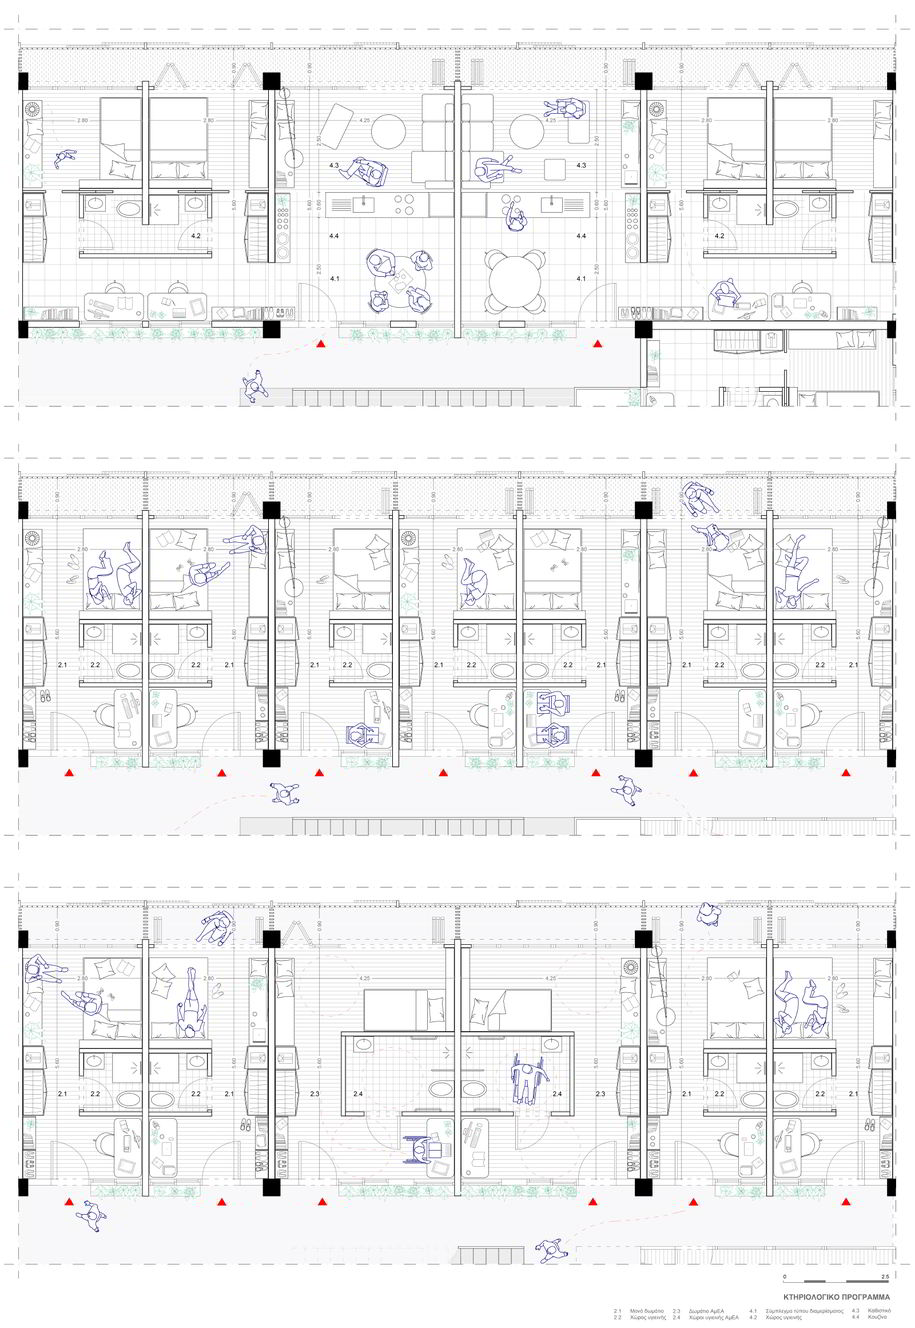 Archisearch Architectural competition for the new TEPAK Dormitories in Limassol, Cyprus - Honorable mention | by Eleni Alexi, Marilena Christodoulou, Elissavet Pasli, Angelos Shiamaris